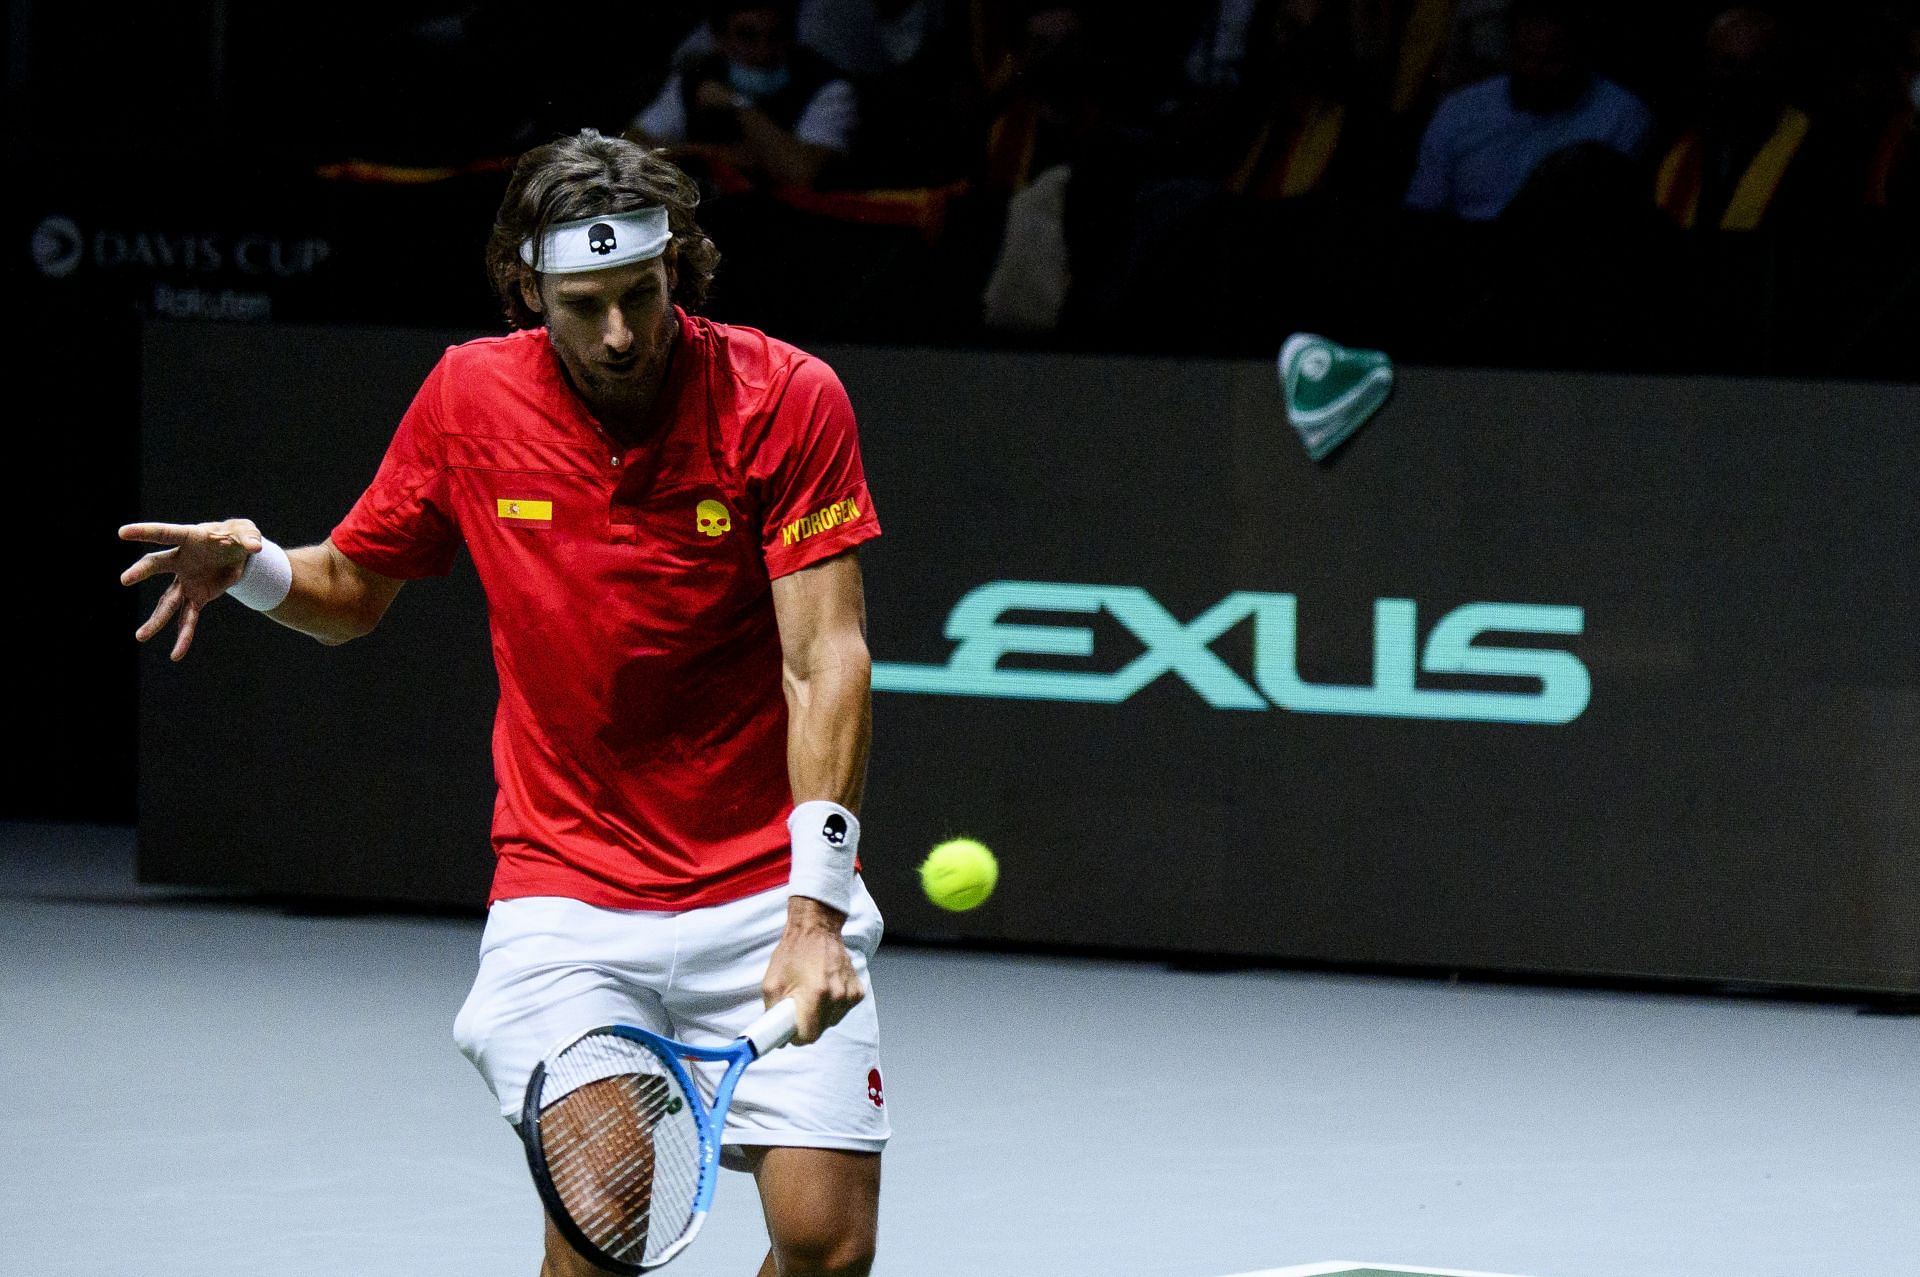 Feliciano Lopez, who represented Spain in the 2021 Davis Cup Finals, will make his record 79th consecutive Grand Slam appearance